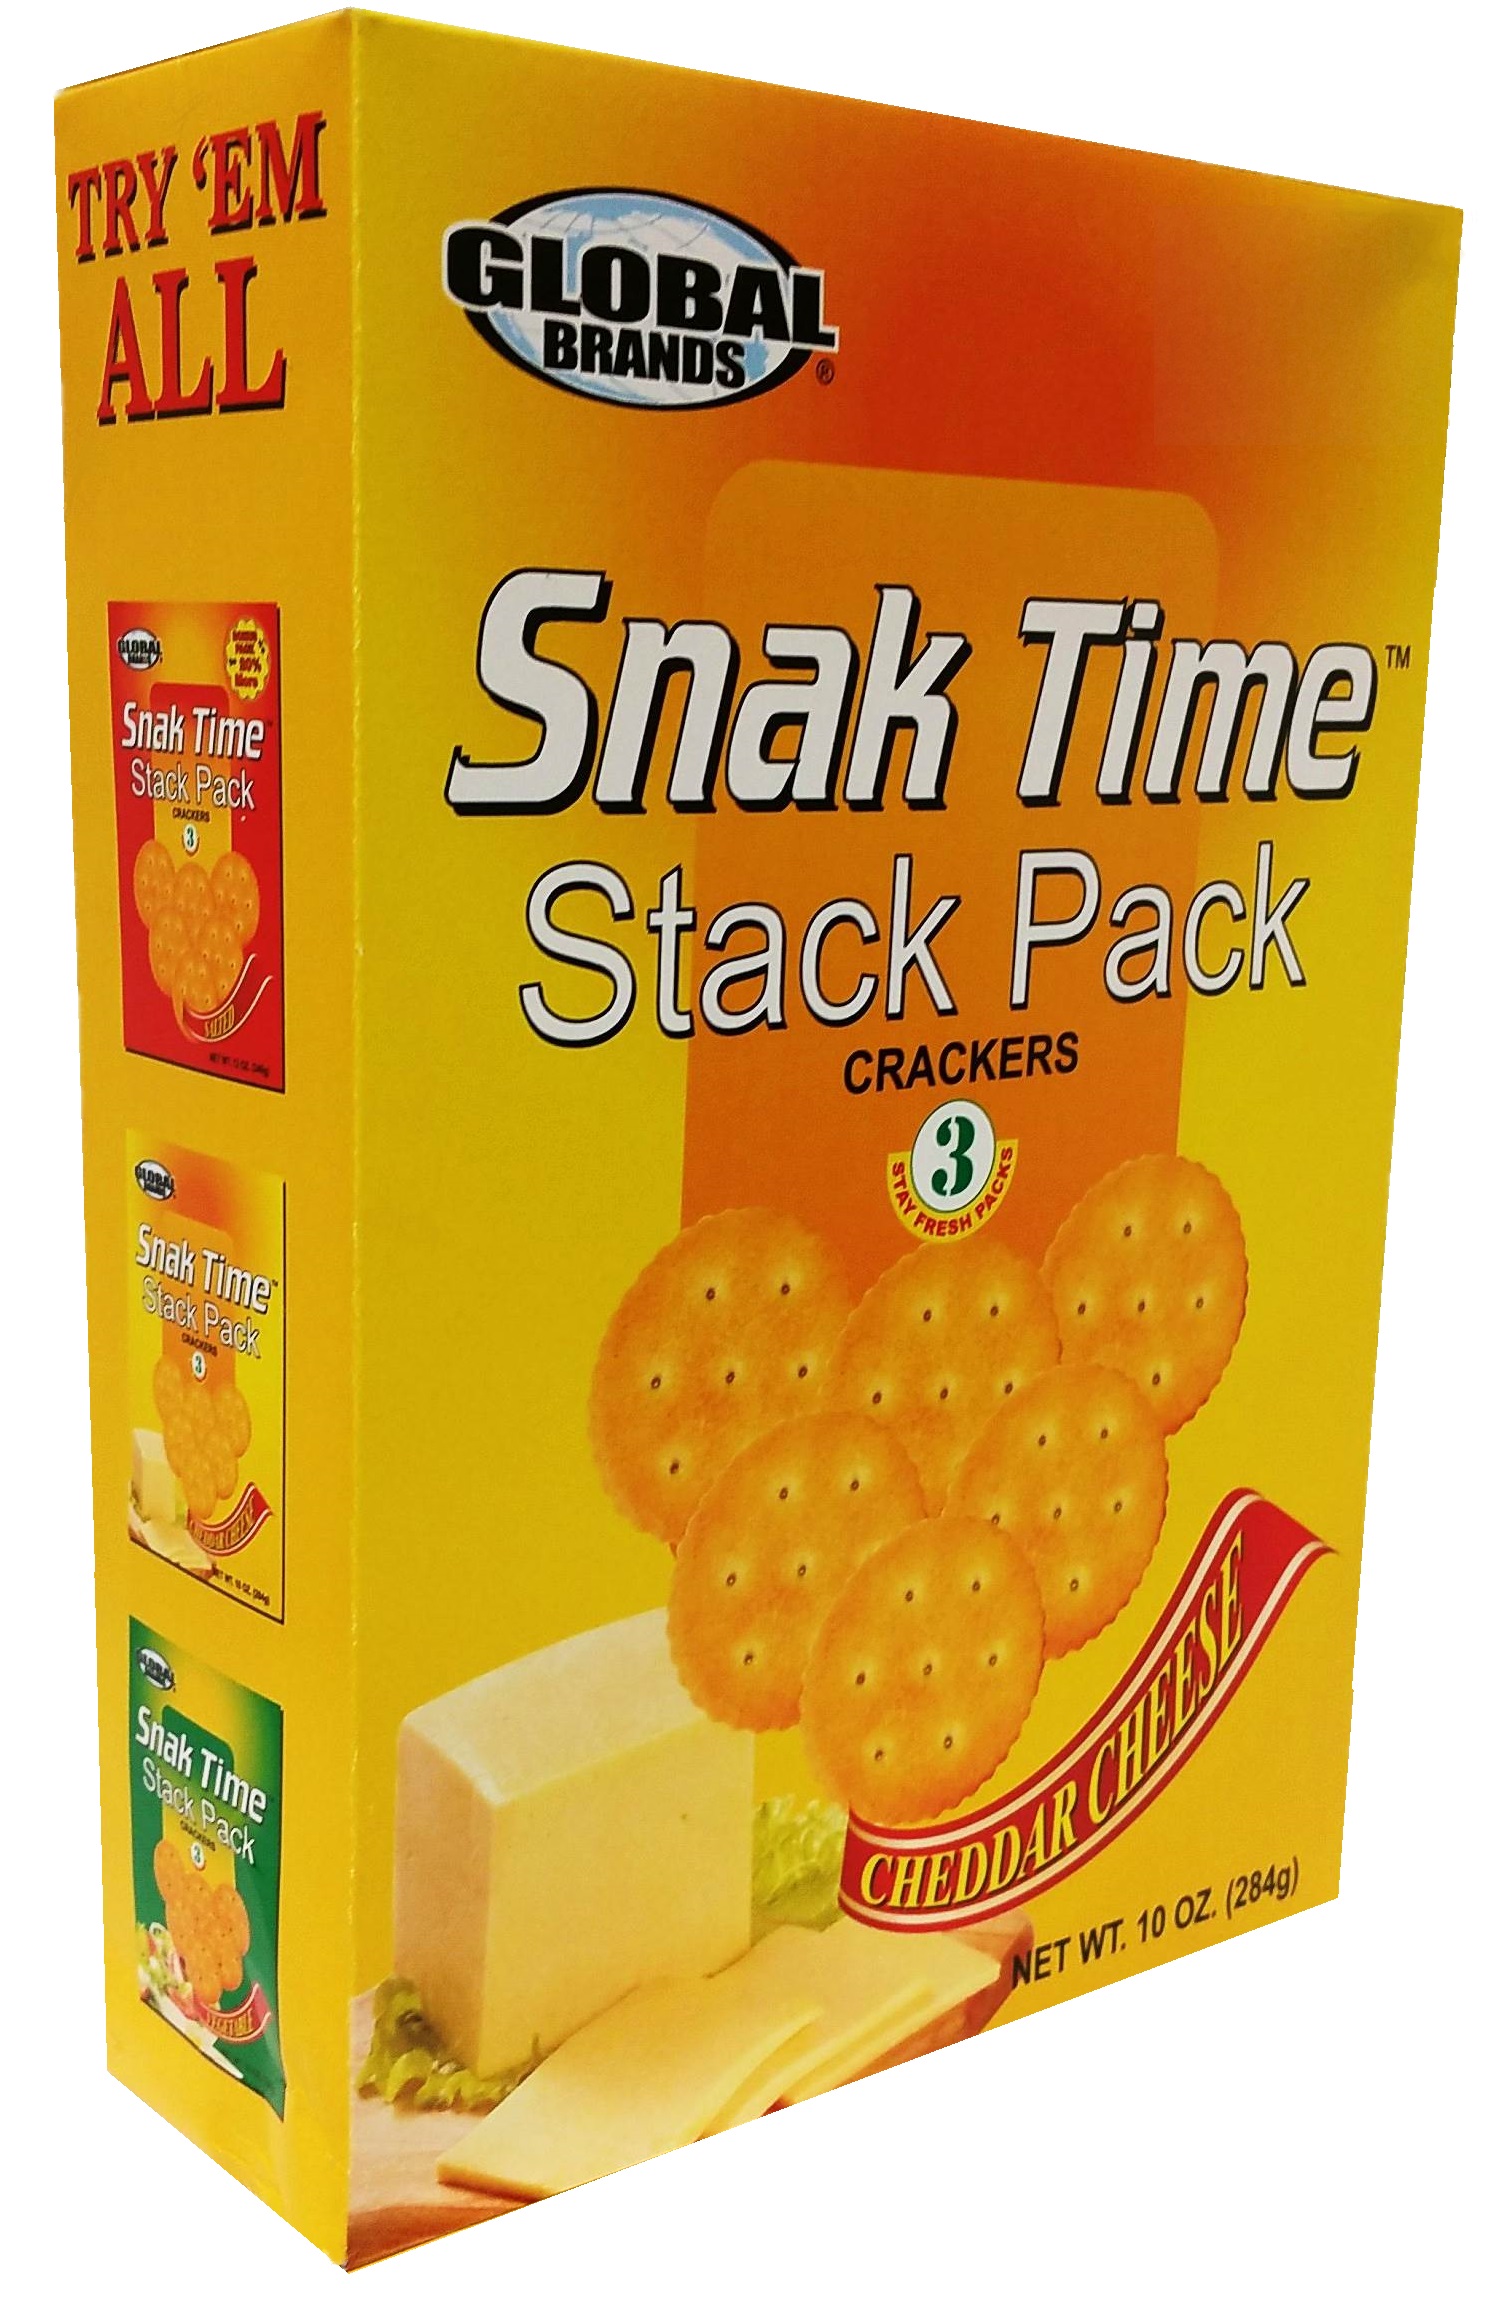 10oz Snak Time Stack Pack - Cheddar Cheese